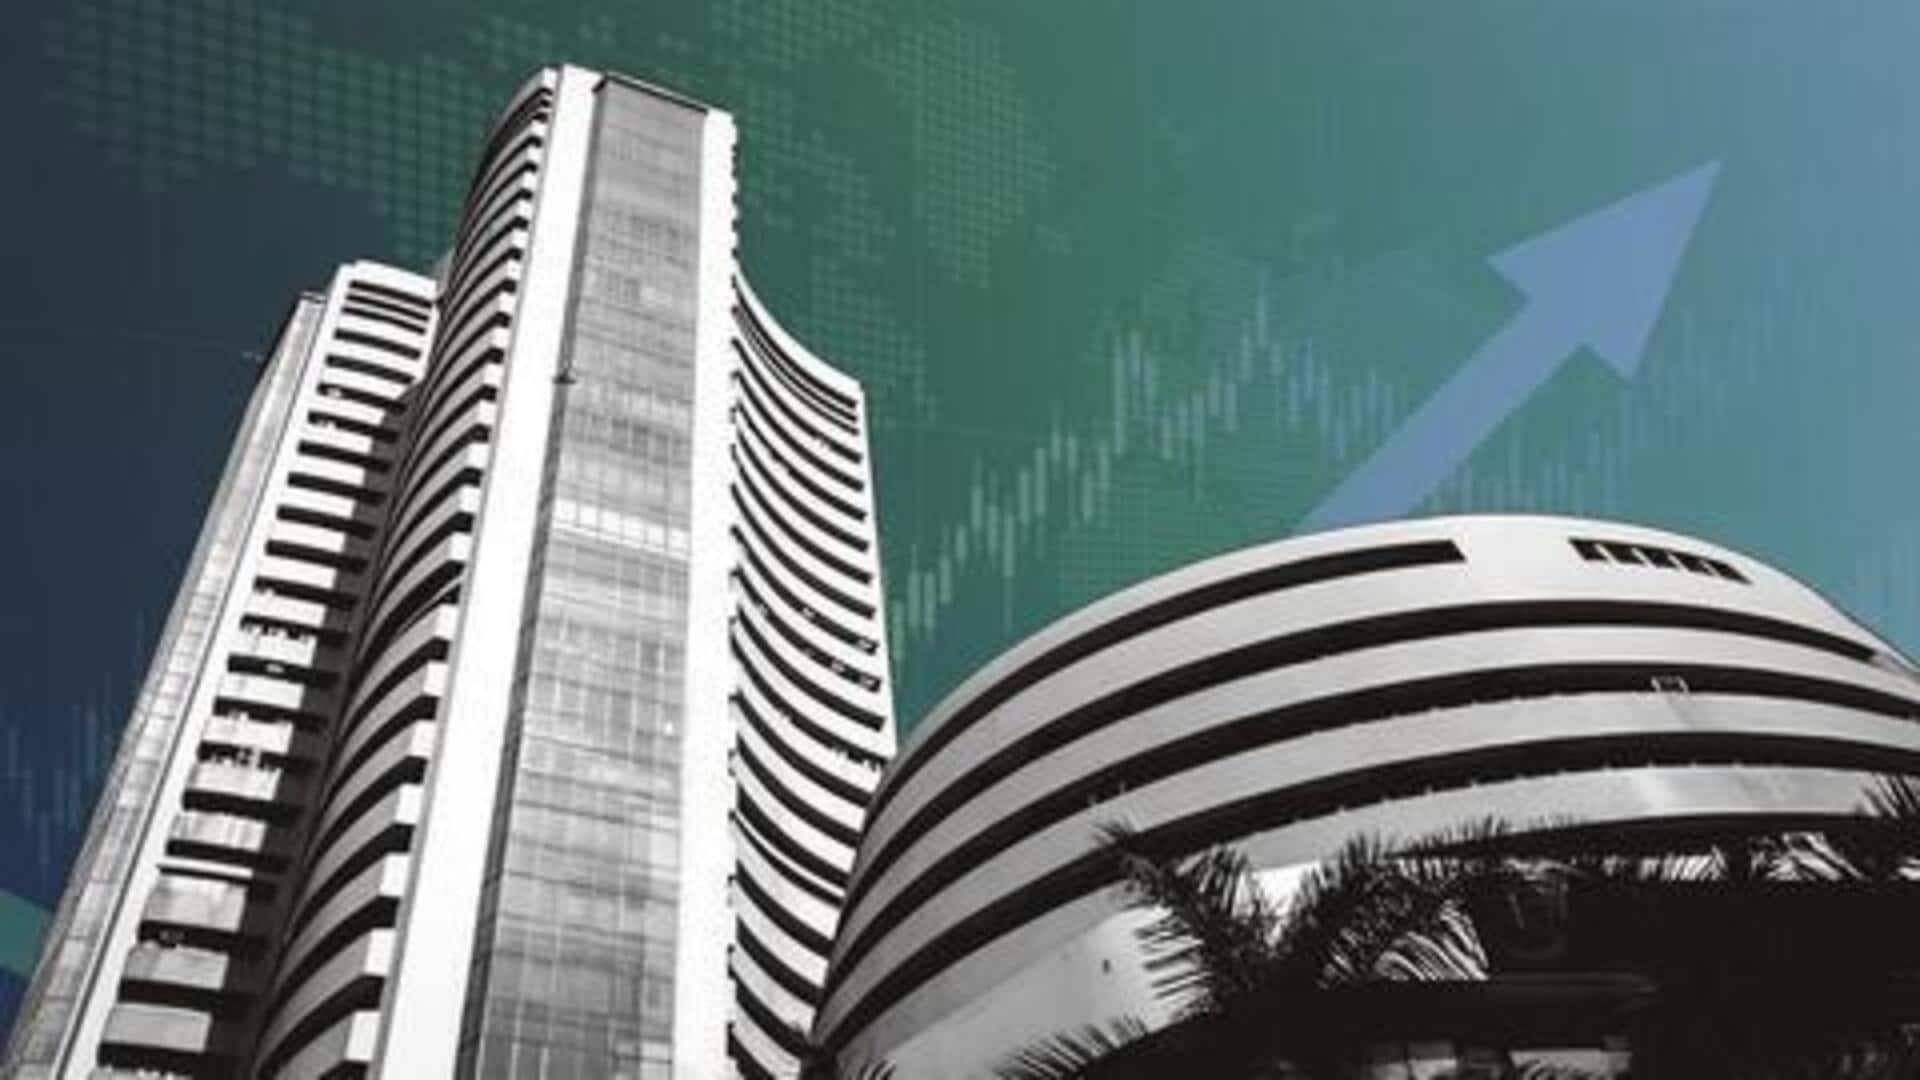 Nifty, Sensex hit fresh high today: What's fueling the rally?